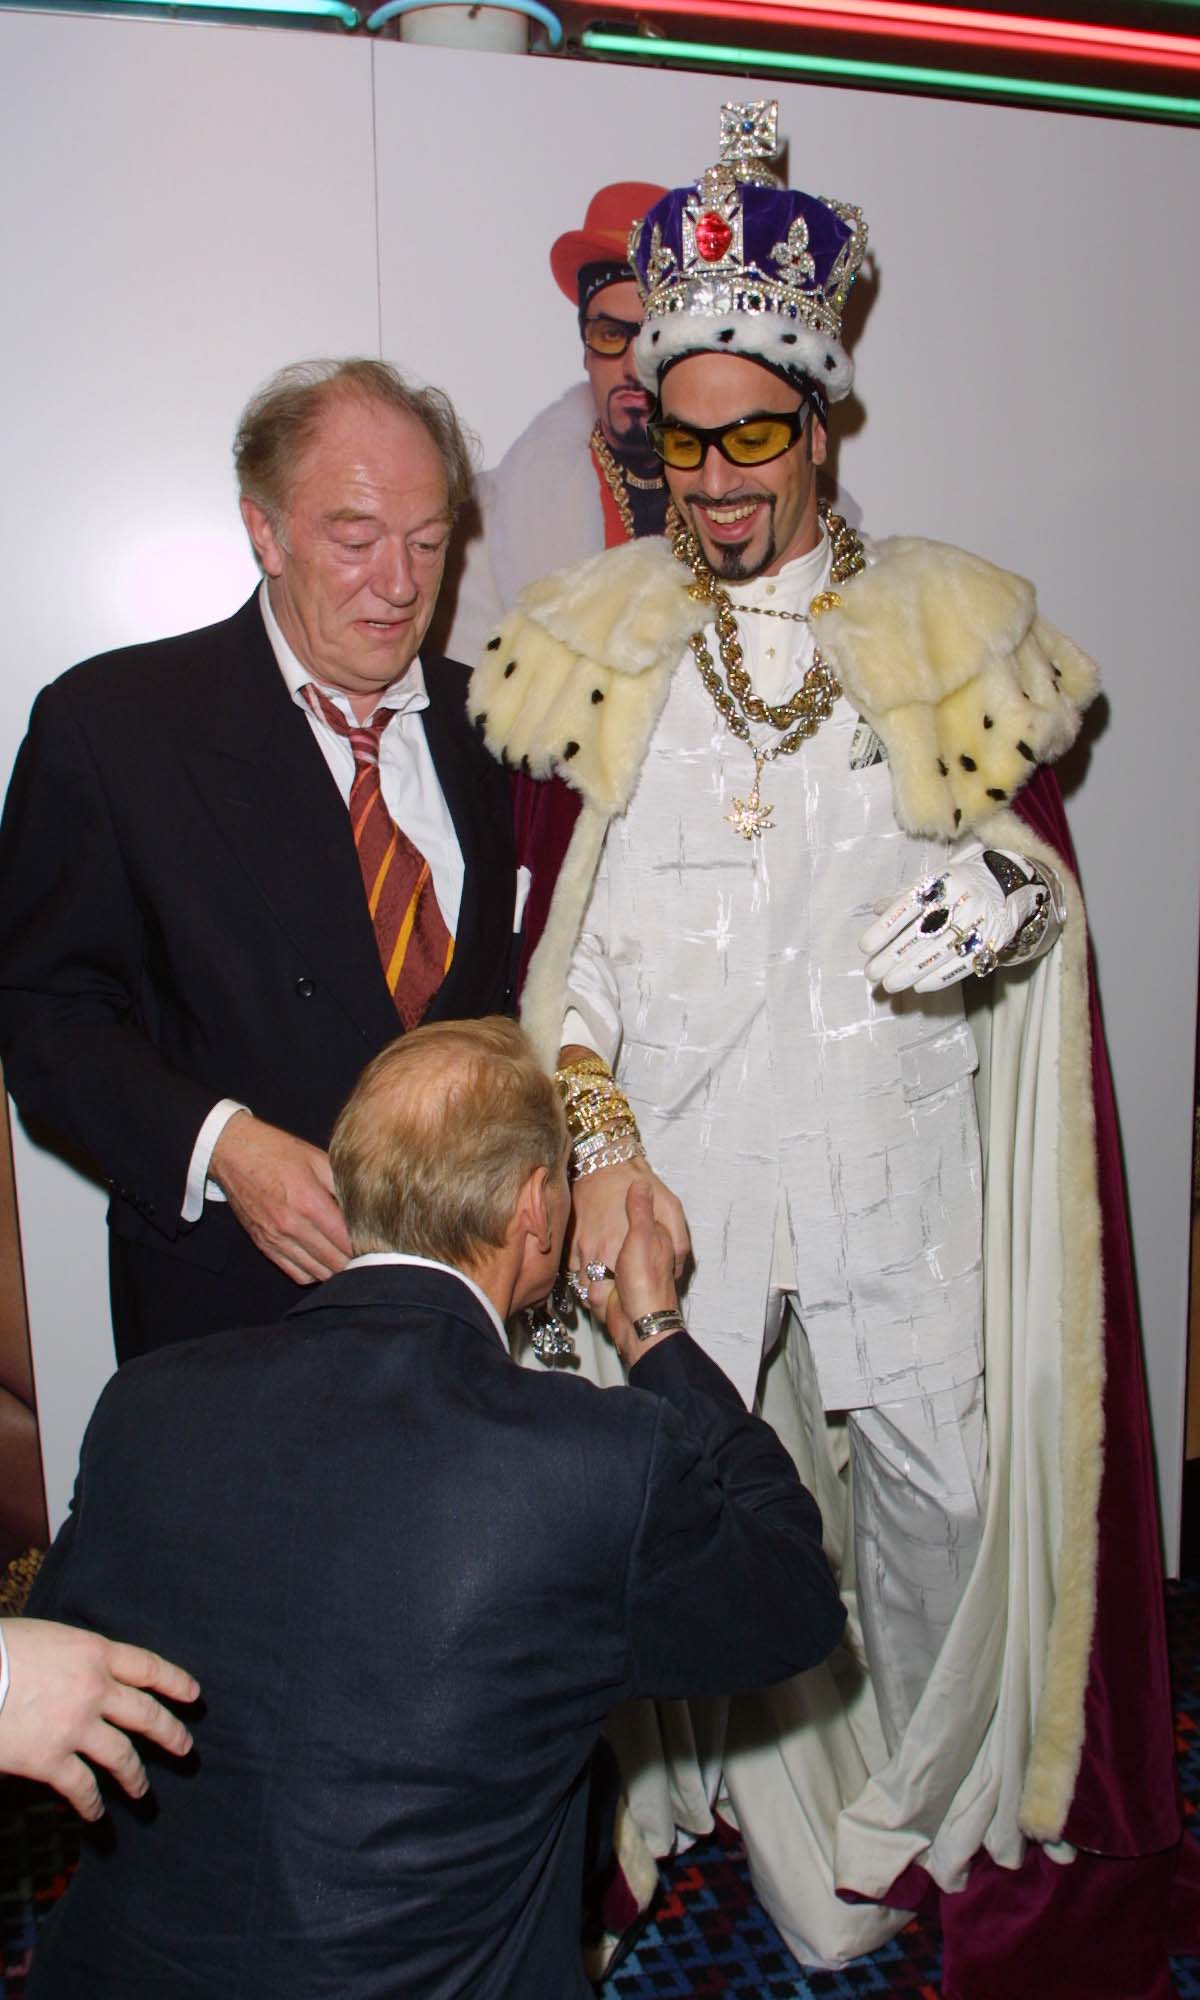 Michael Gambon with Sacha Baron Cohen as Ali G at the 2022 London preimere of Ali G Indahouse.